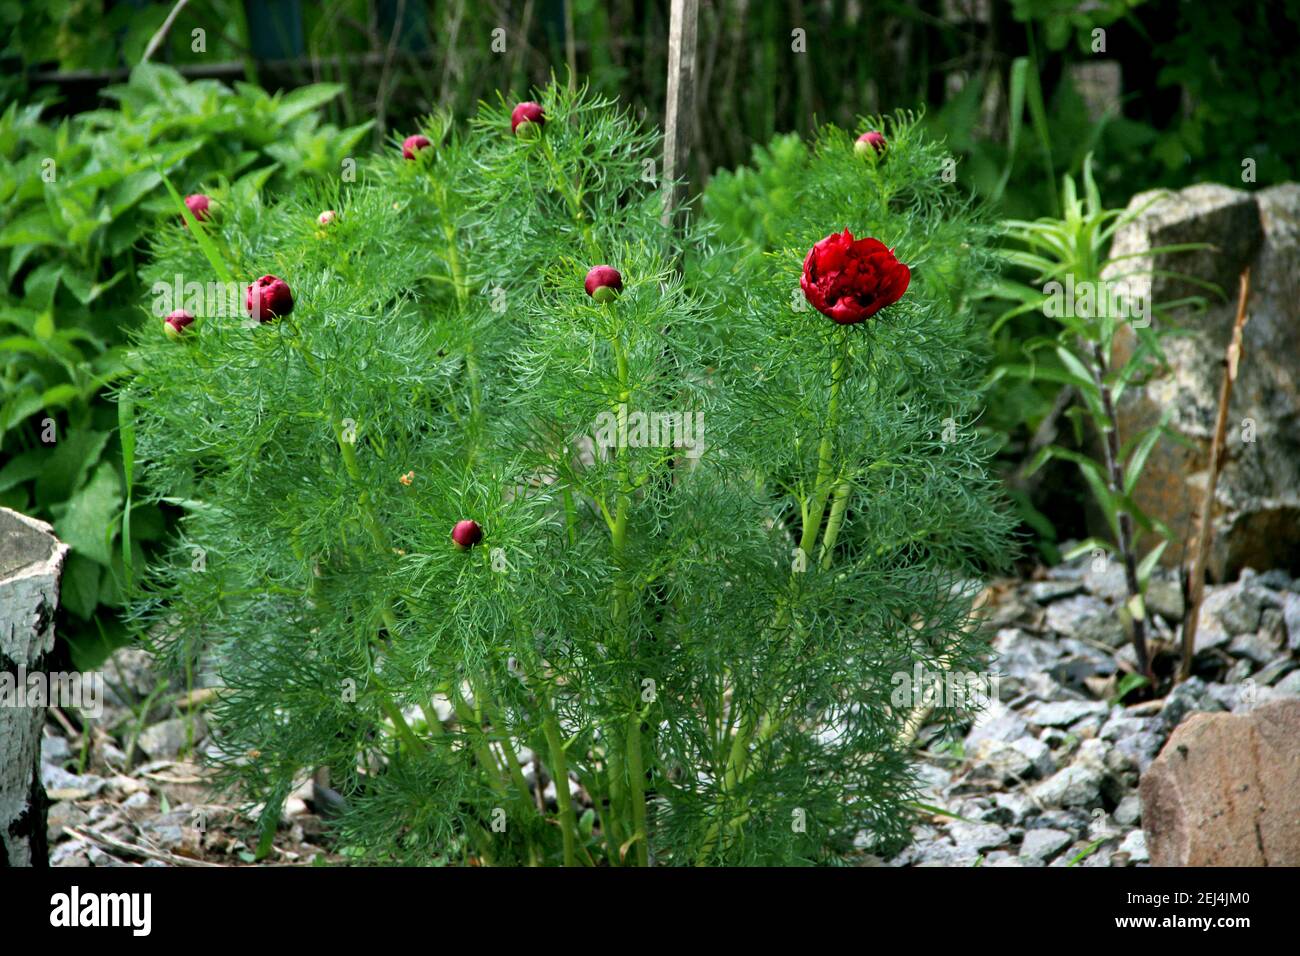 Vibrant red flowers on sturdy stems surrounded by green leaves like a conifer needles. Stock Photo